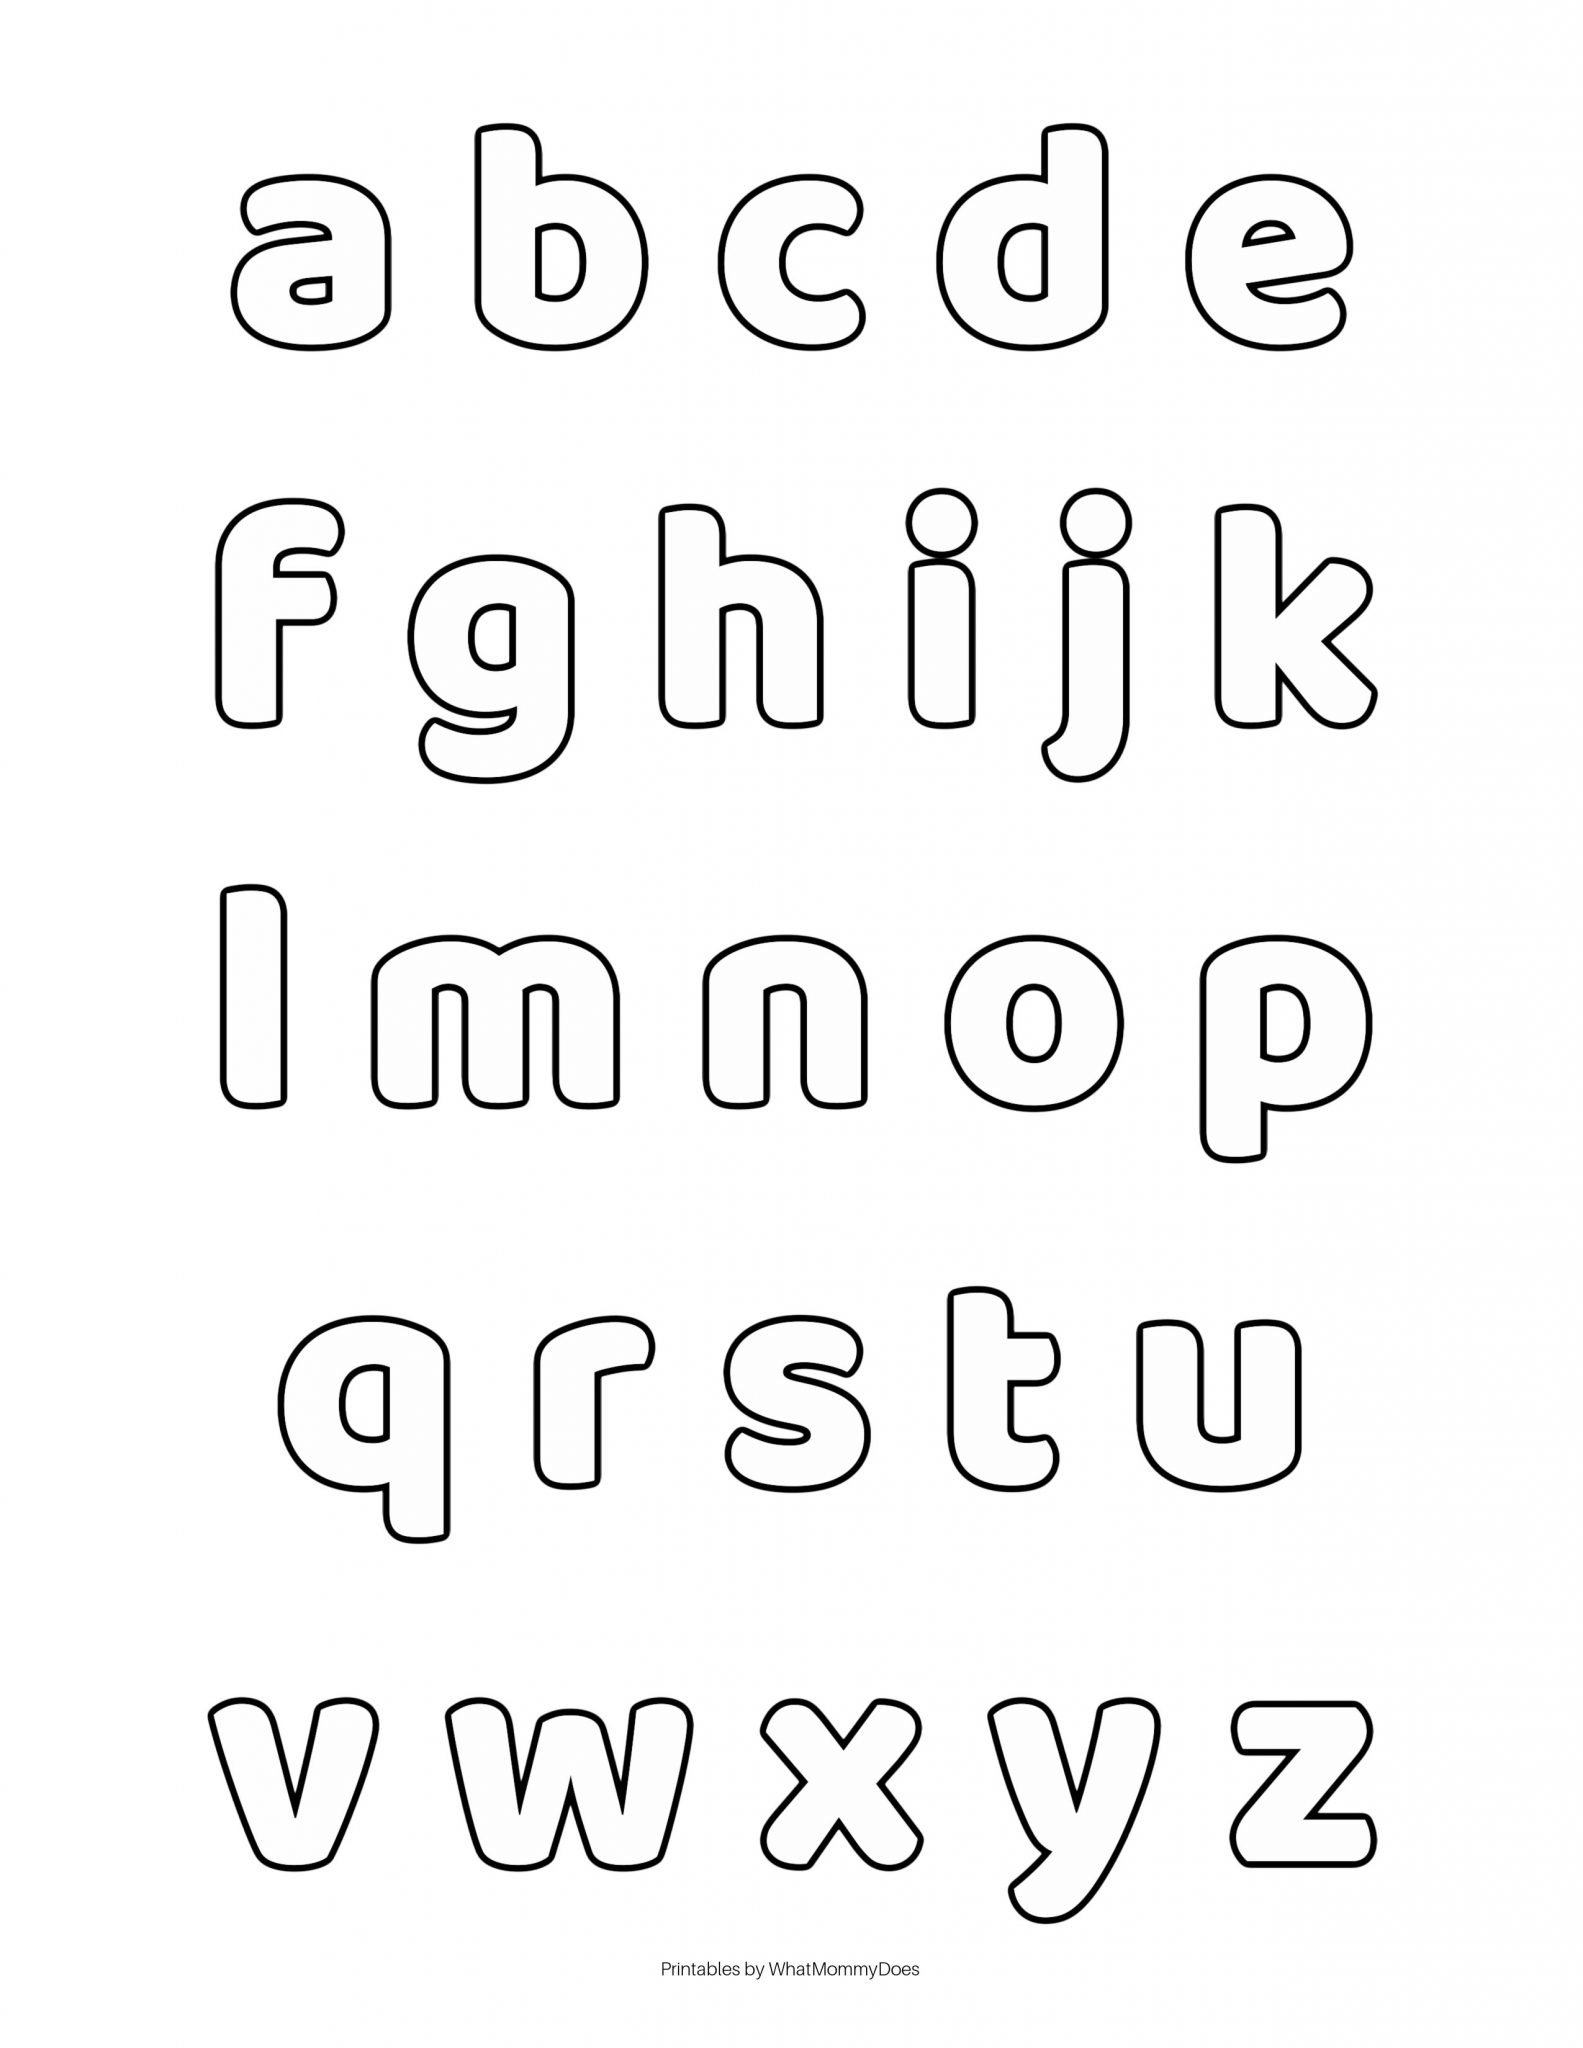 printable-letters-big-letters-1-character-per-page-large-printable